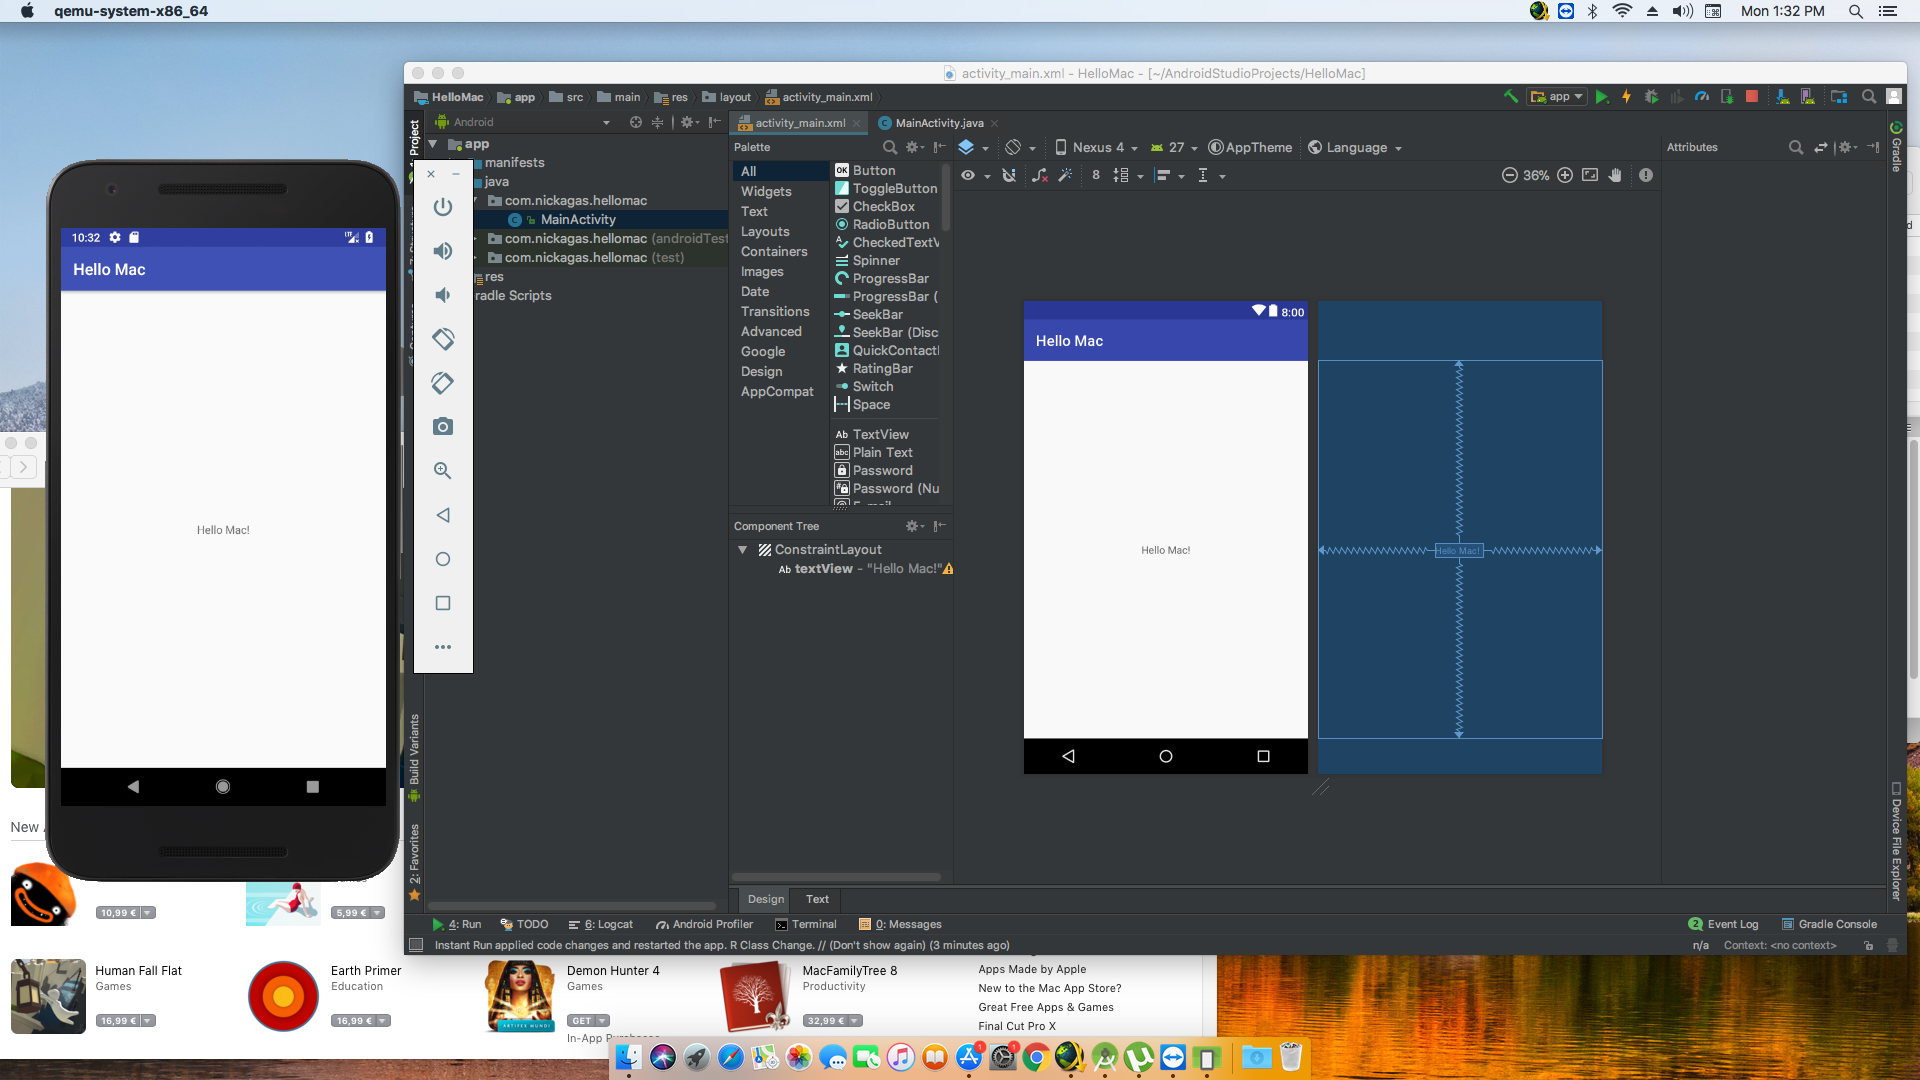 visual studio emulator for android for mac